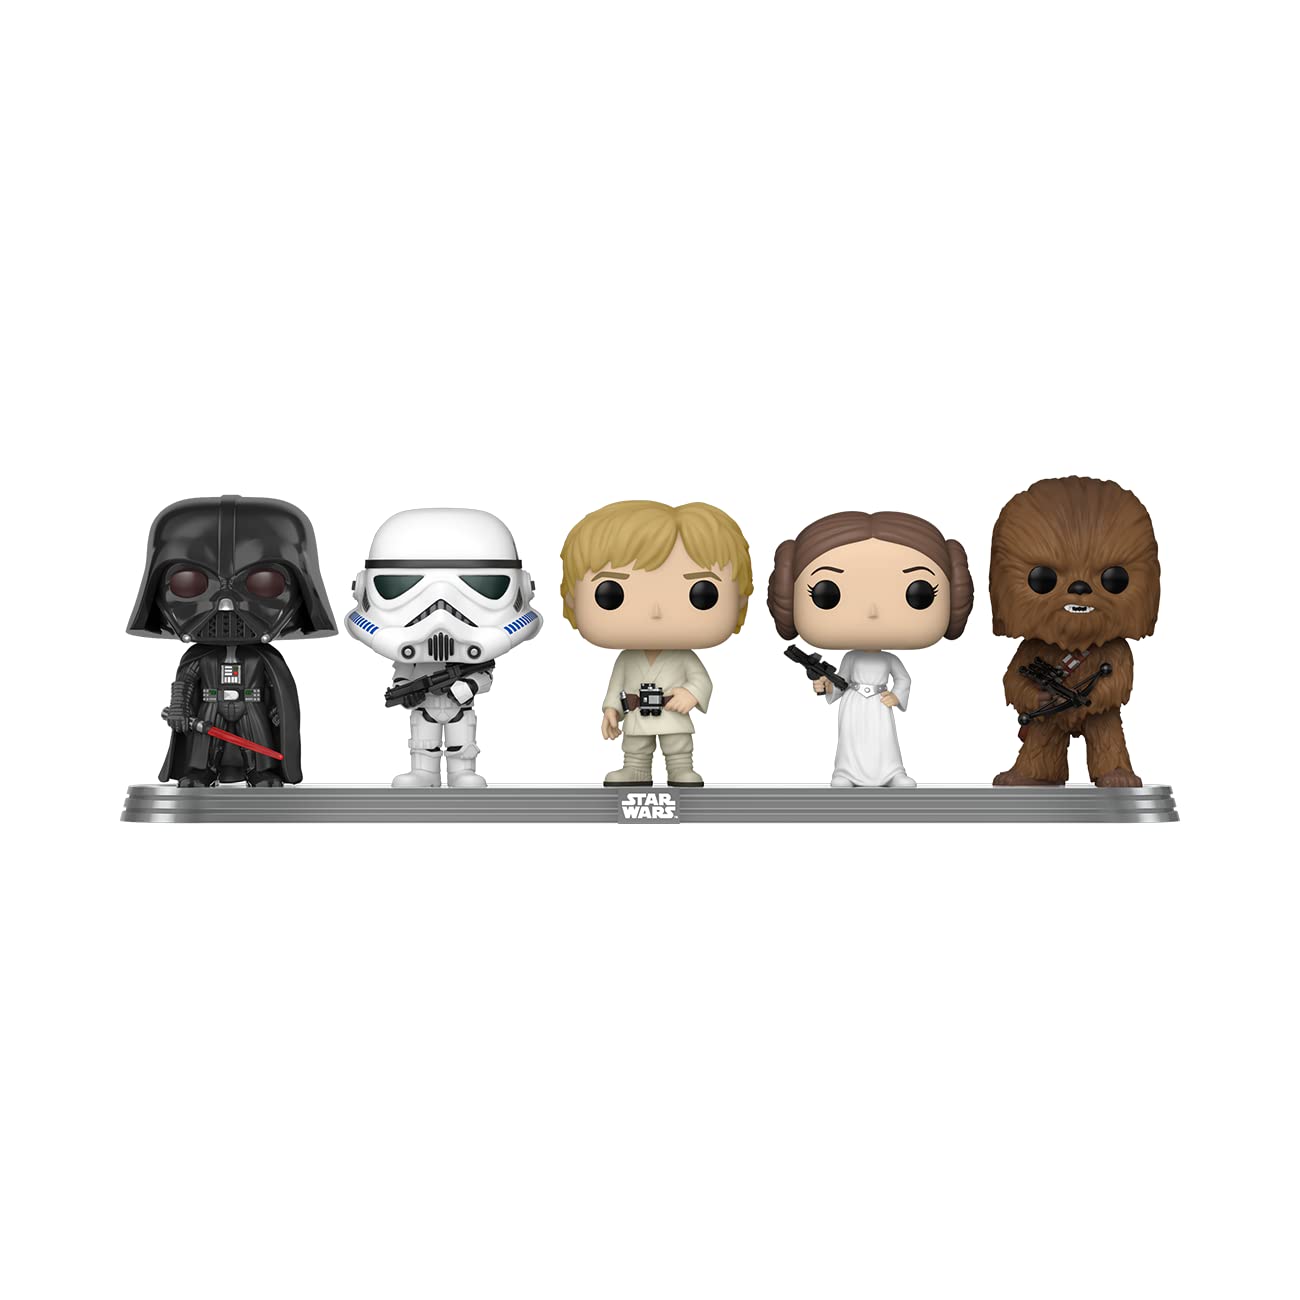 3.9" Funko Pop! Vinyl Bobbleheads Star Wars: Darth Vader, Stormtrooper, Luke, Leia & Chewbacca on Stand (Shared Galactic Convention) $27.65 + Free Shipping